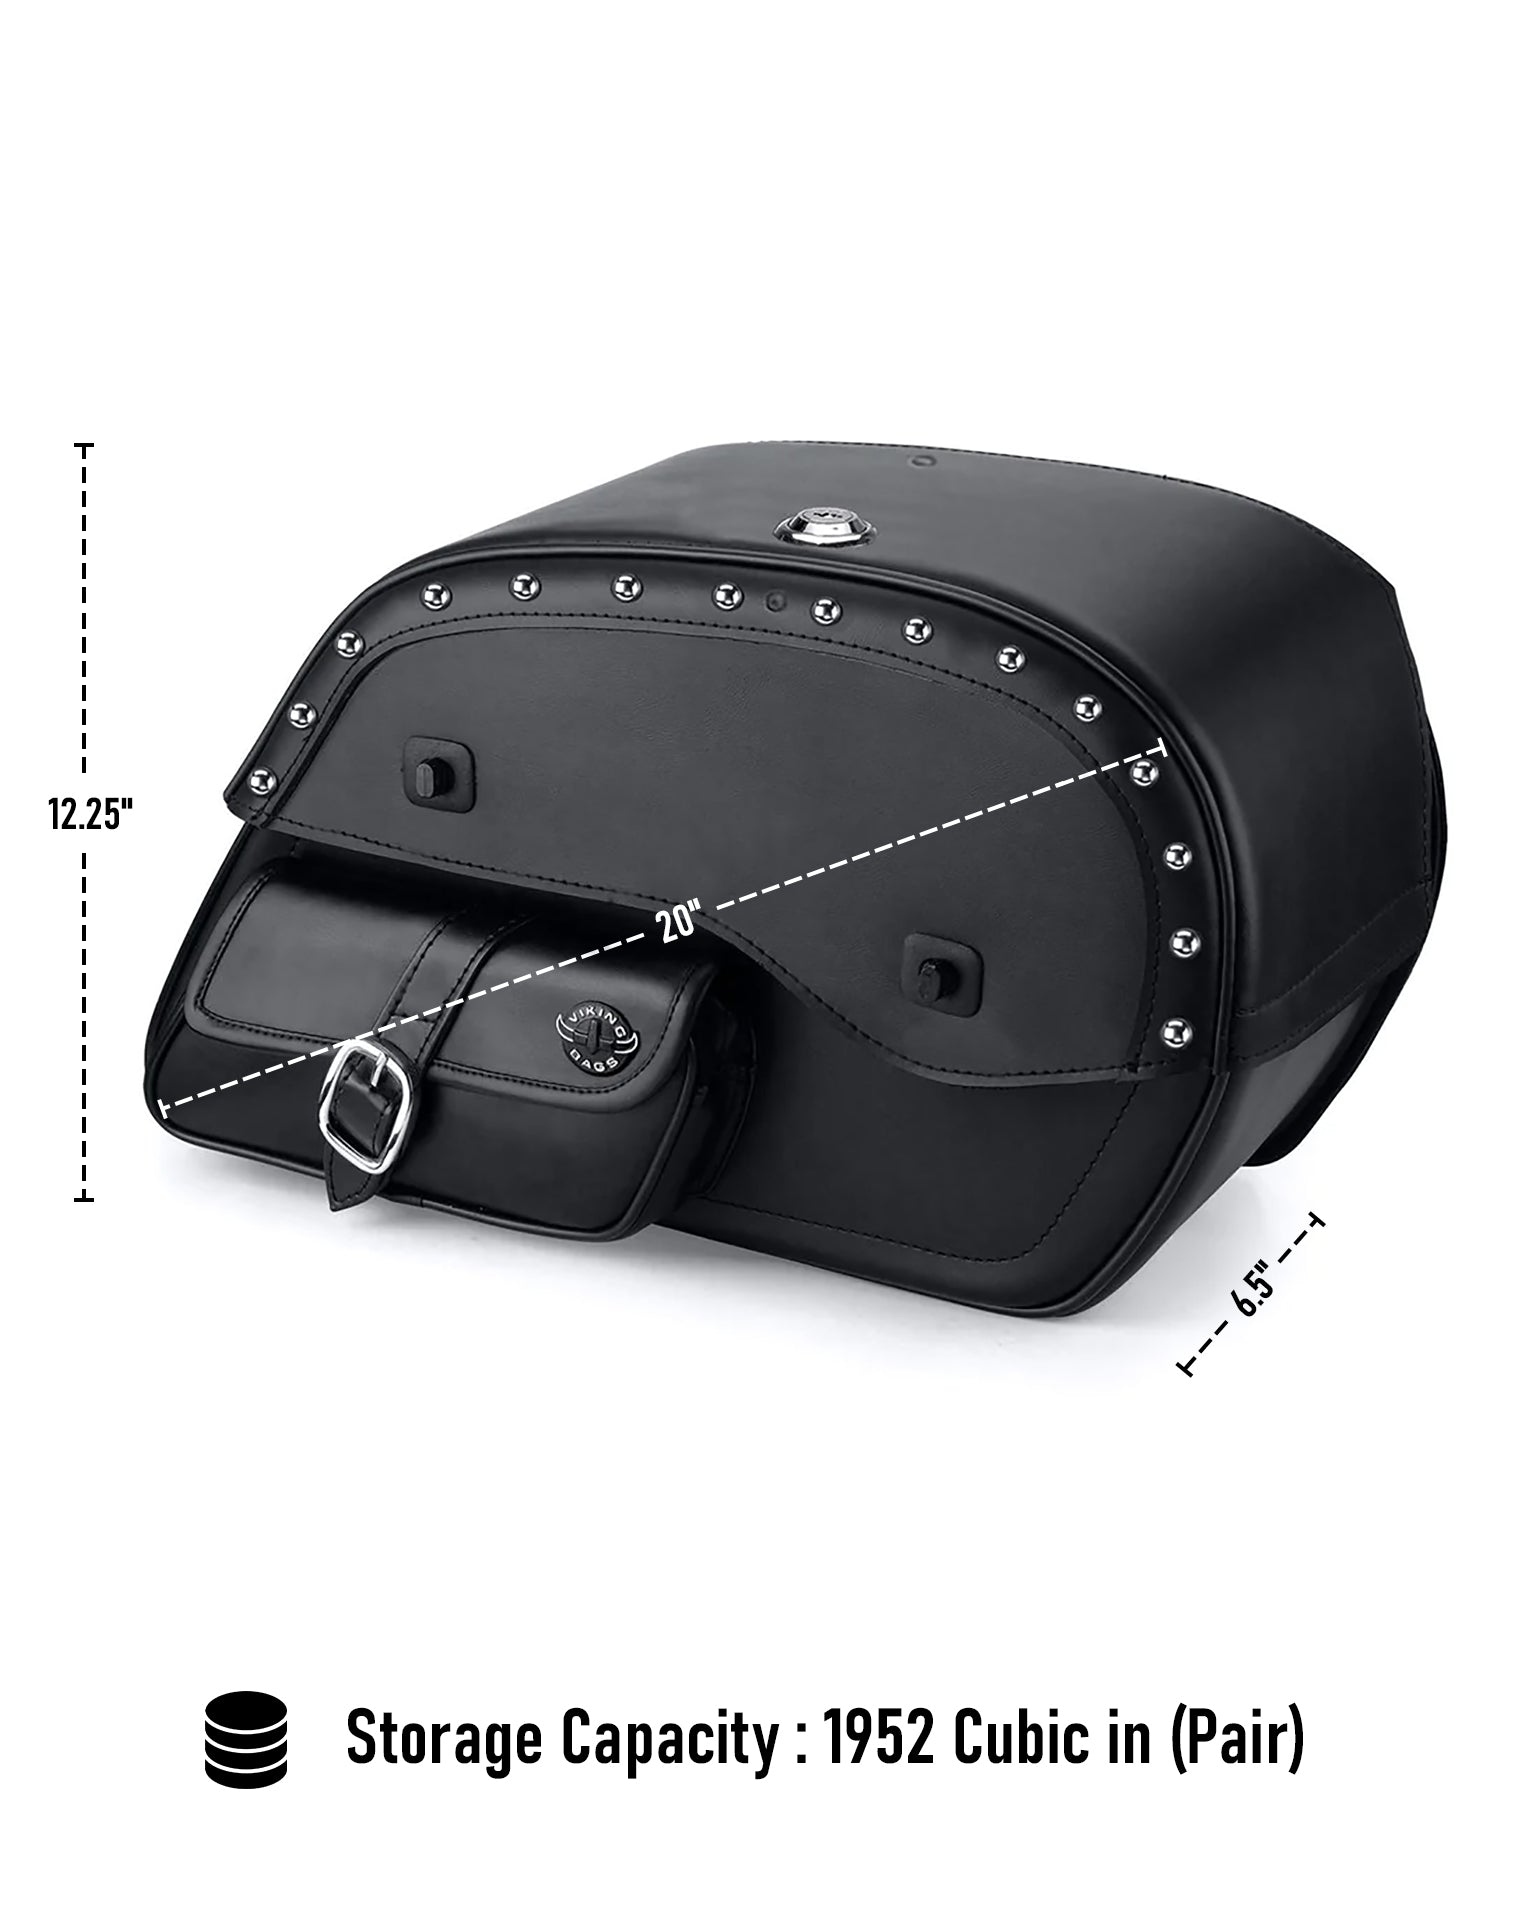 Viking Essential Side Pocket Large Studded Kawasaki Vulcan 1700 Classic Vn1700 Leather Motorcycle Saddlebags Weather Resistant Bags Comes in Pair